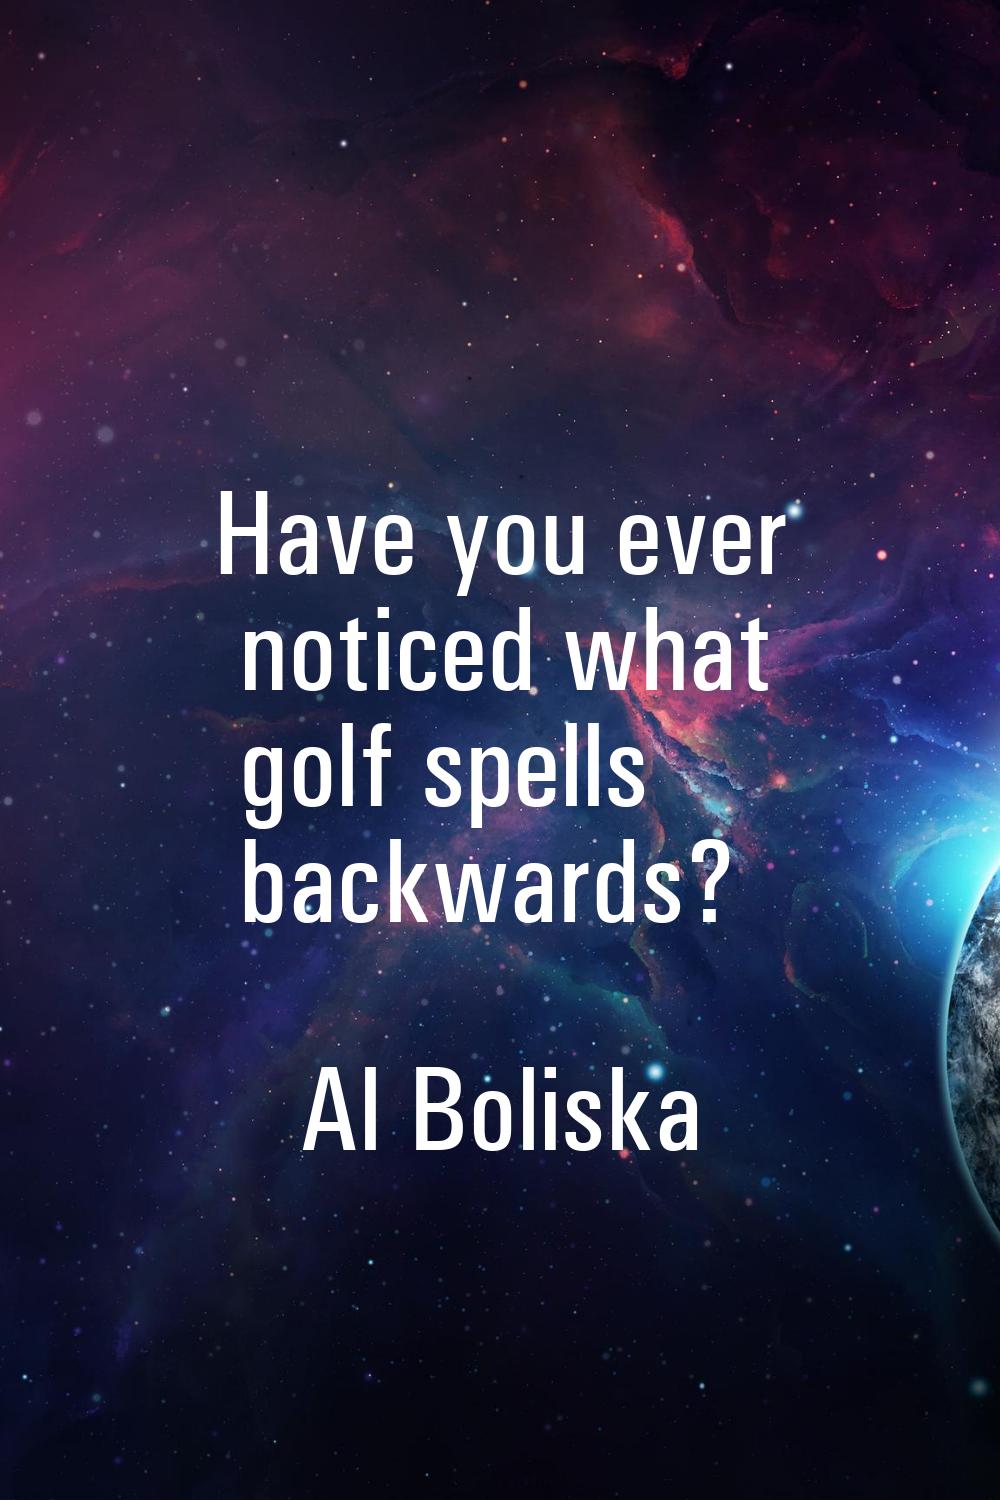 Have you ever noticed what golf spells backwards?